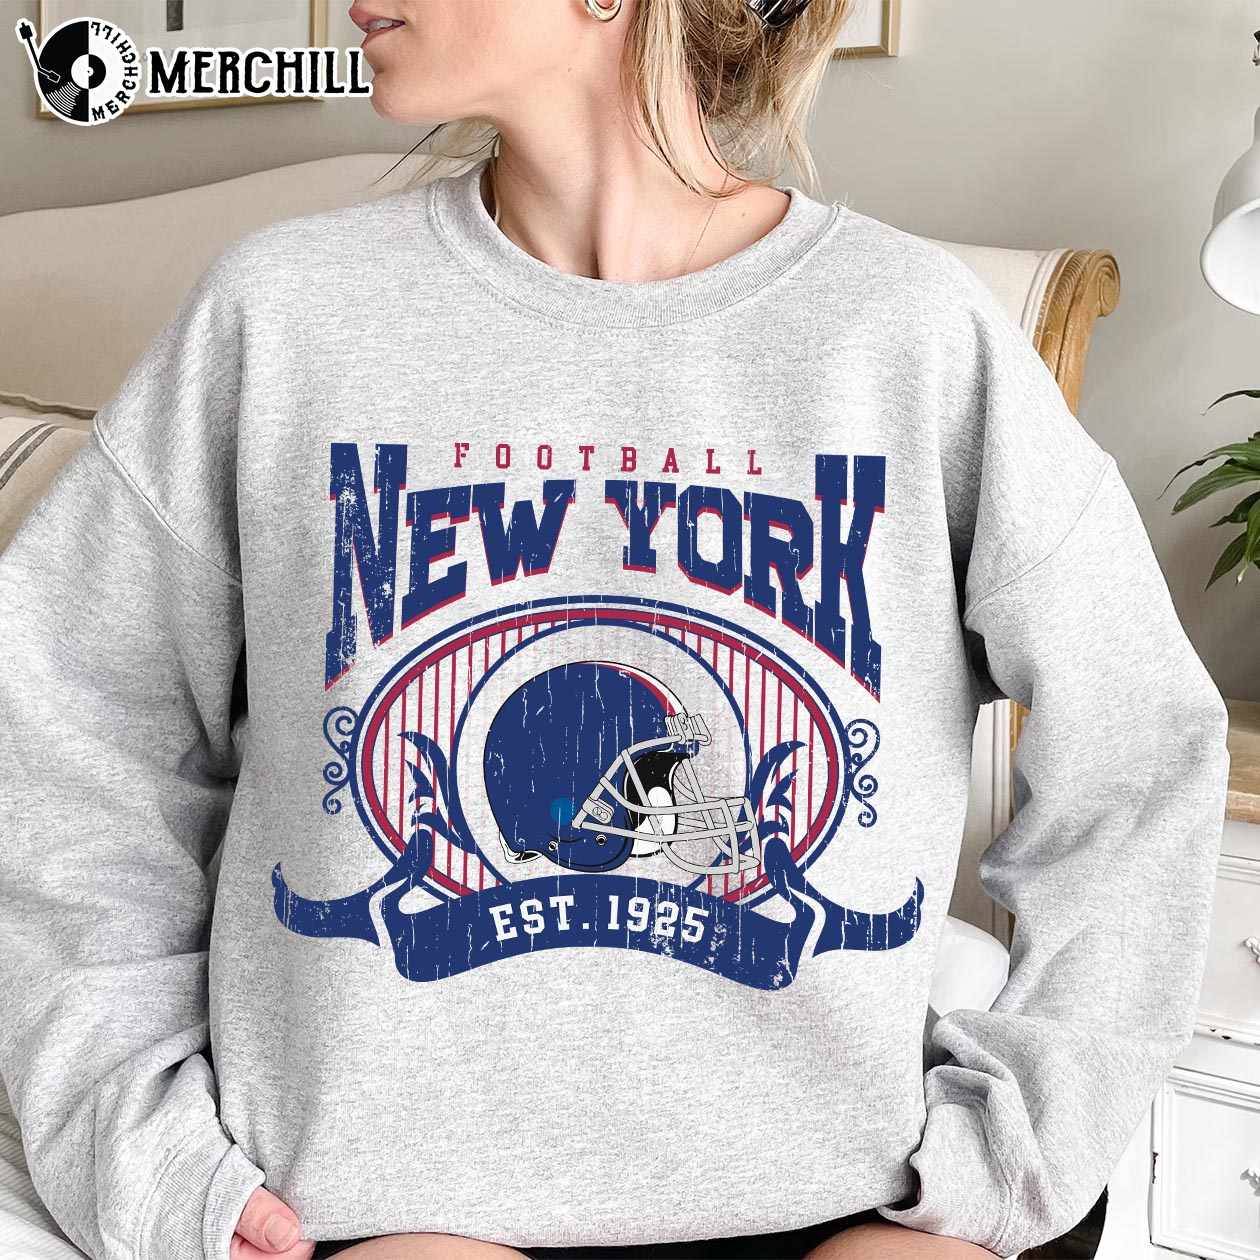 Giant Sweatshirt New York Football Crewneck - Happy Place for Music Lovers